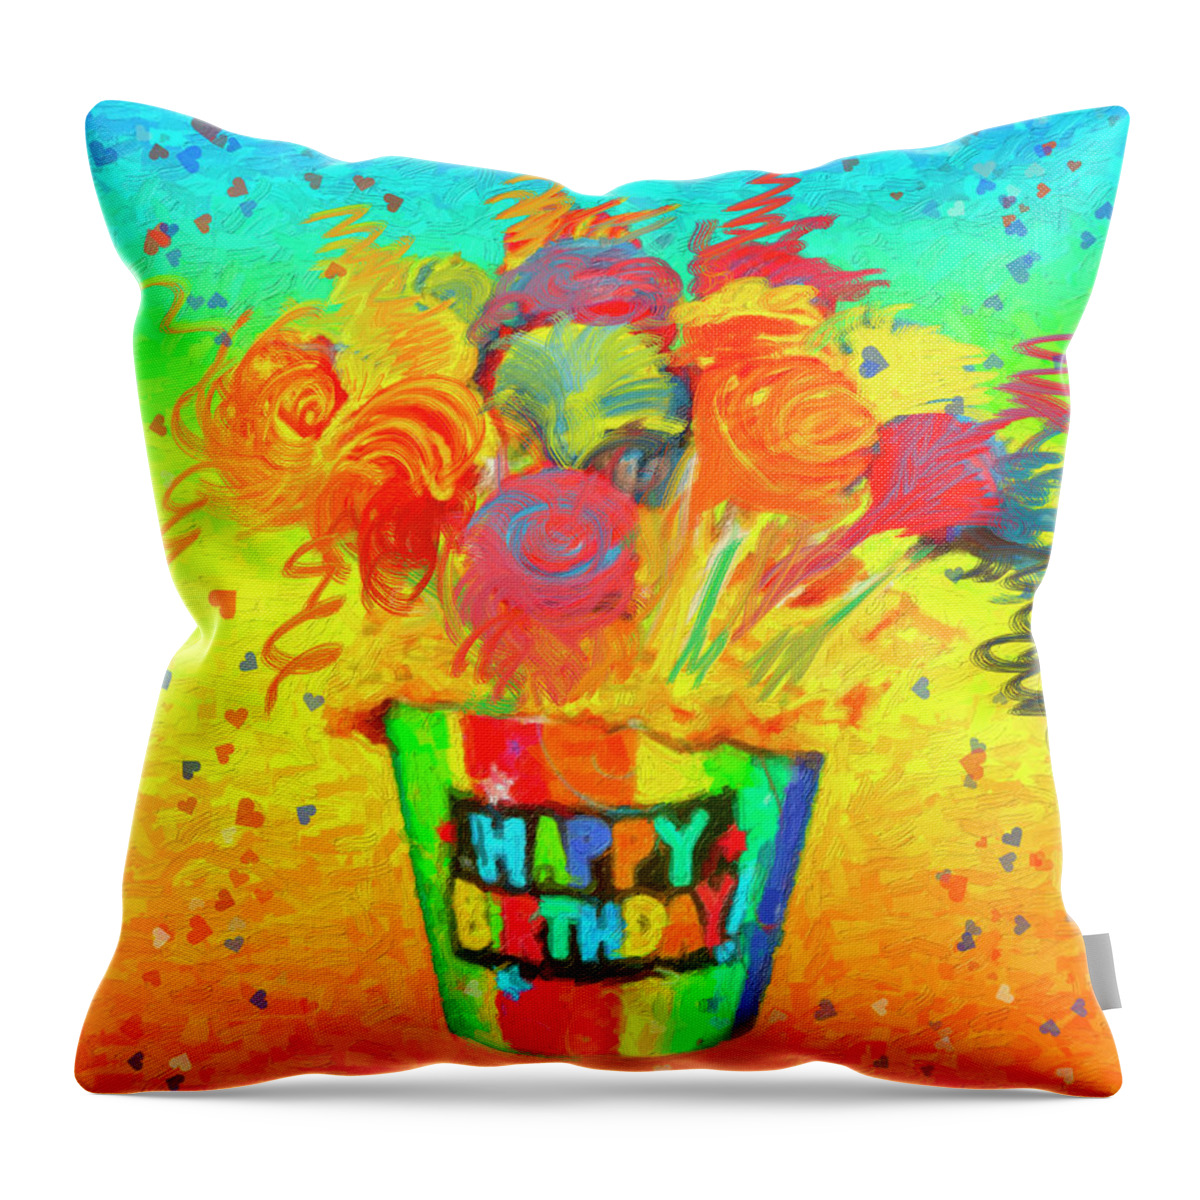 Flower Throw Pillow featuring the painting Happy Birthday by Angela Stanton